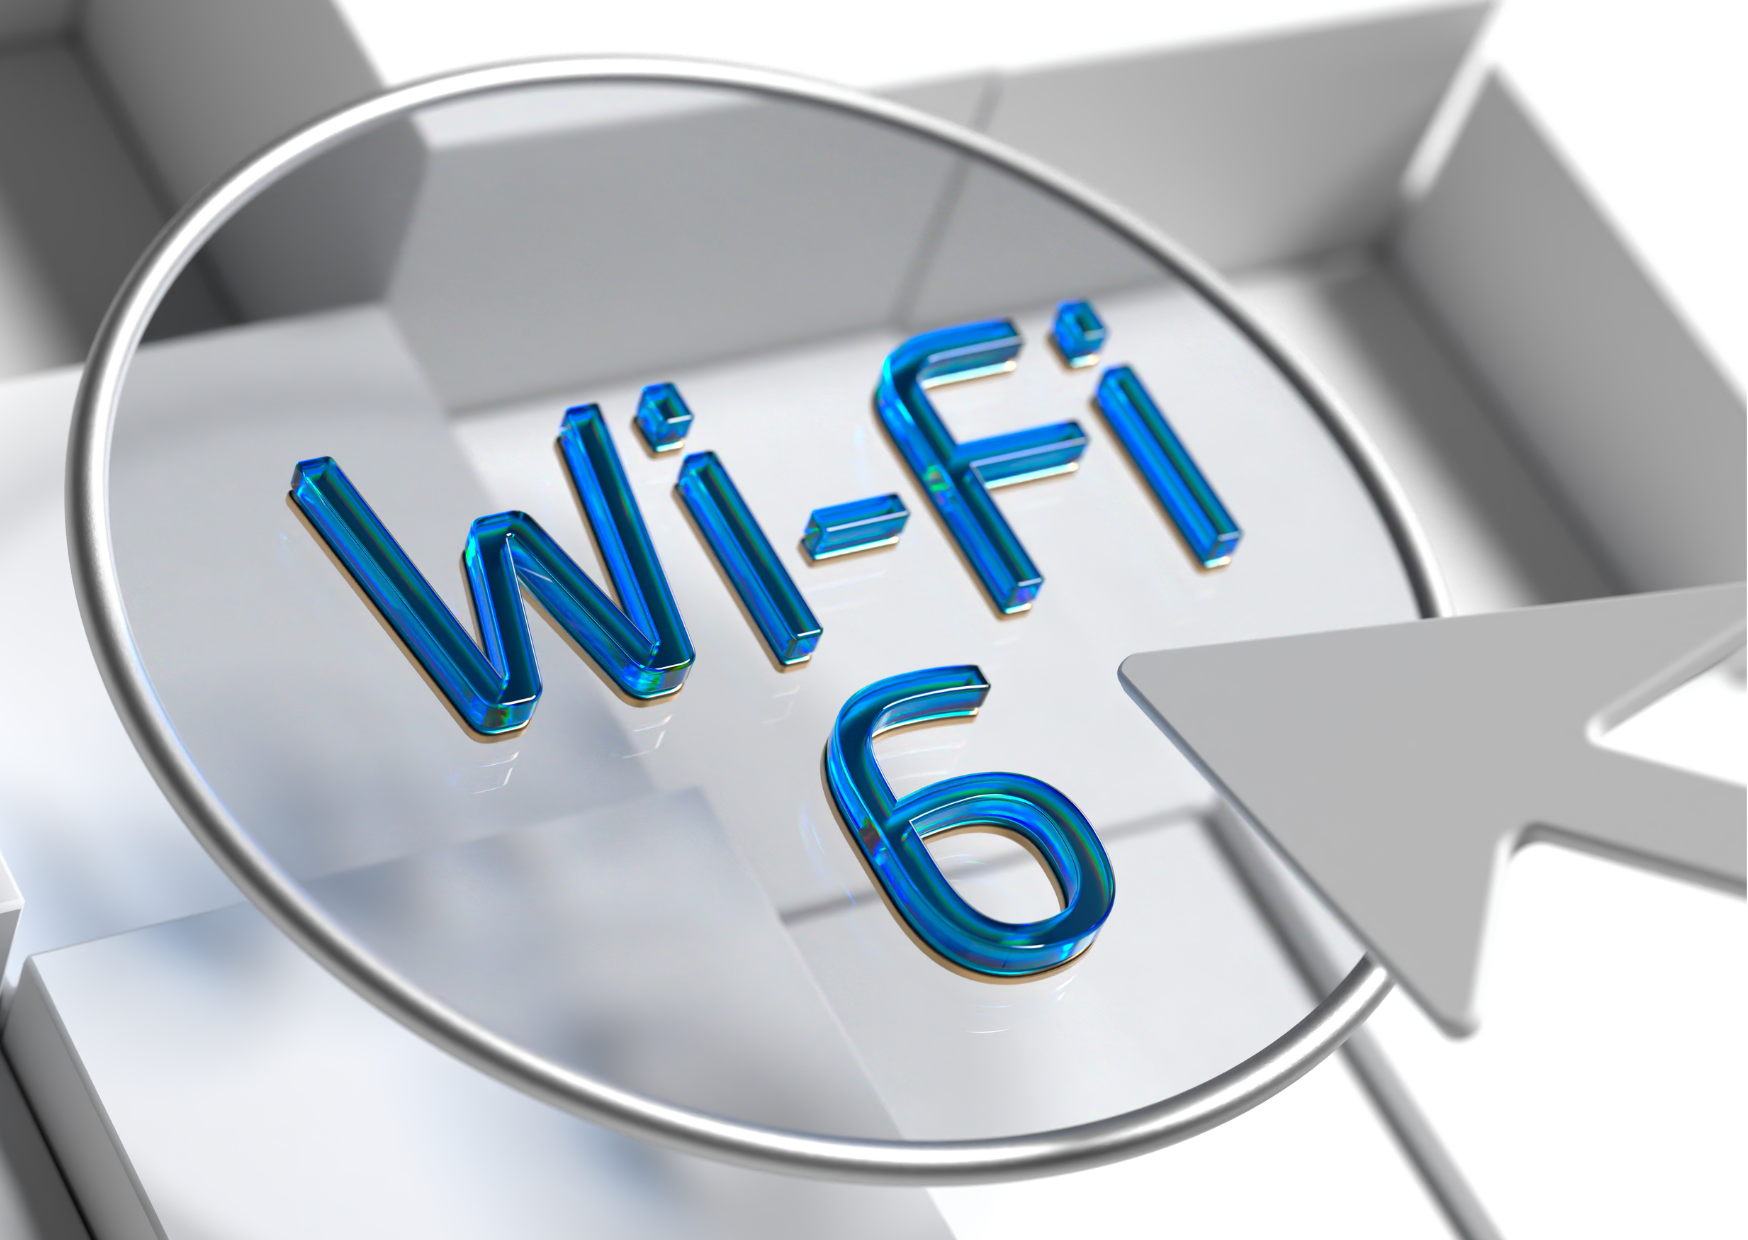 Get to know the Next Generation of WiFi